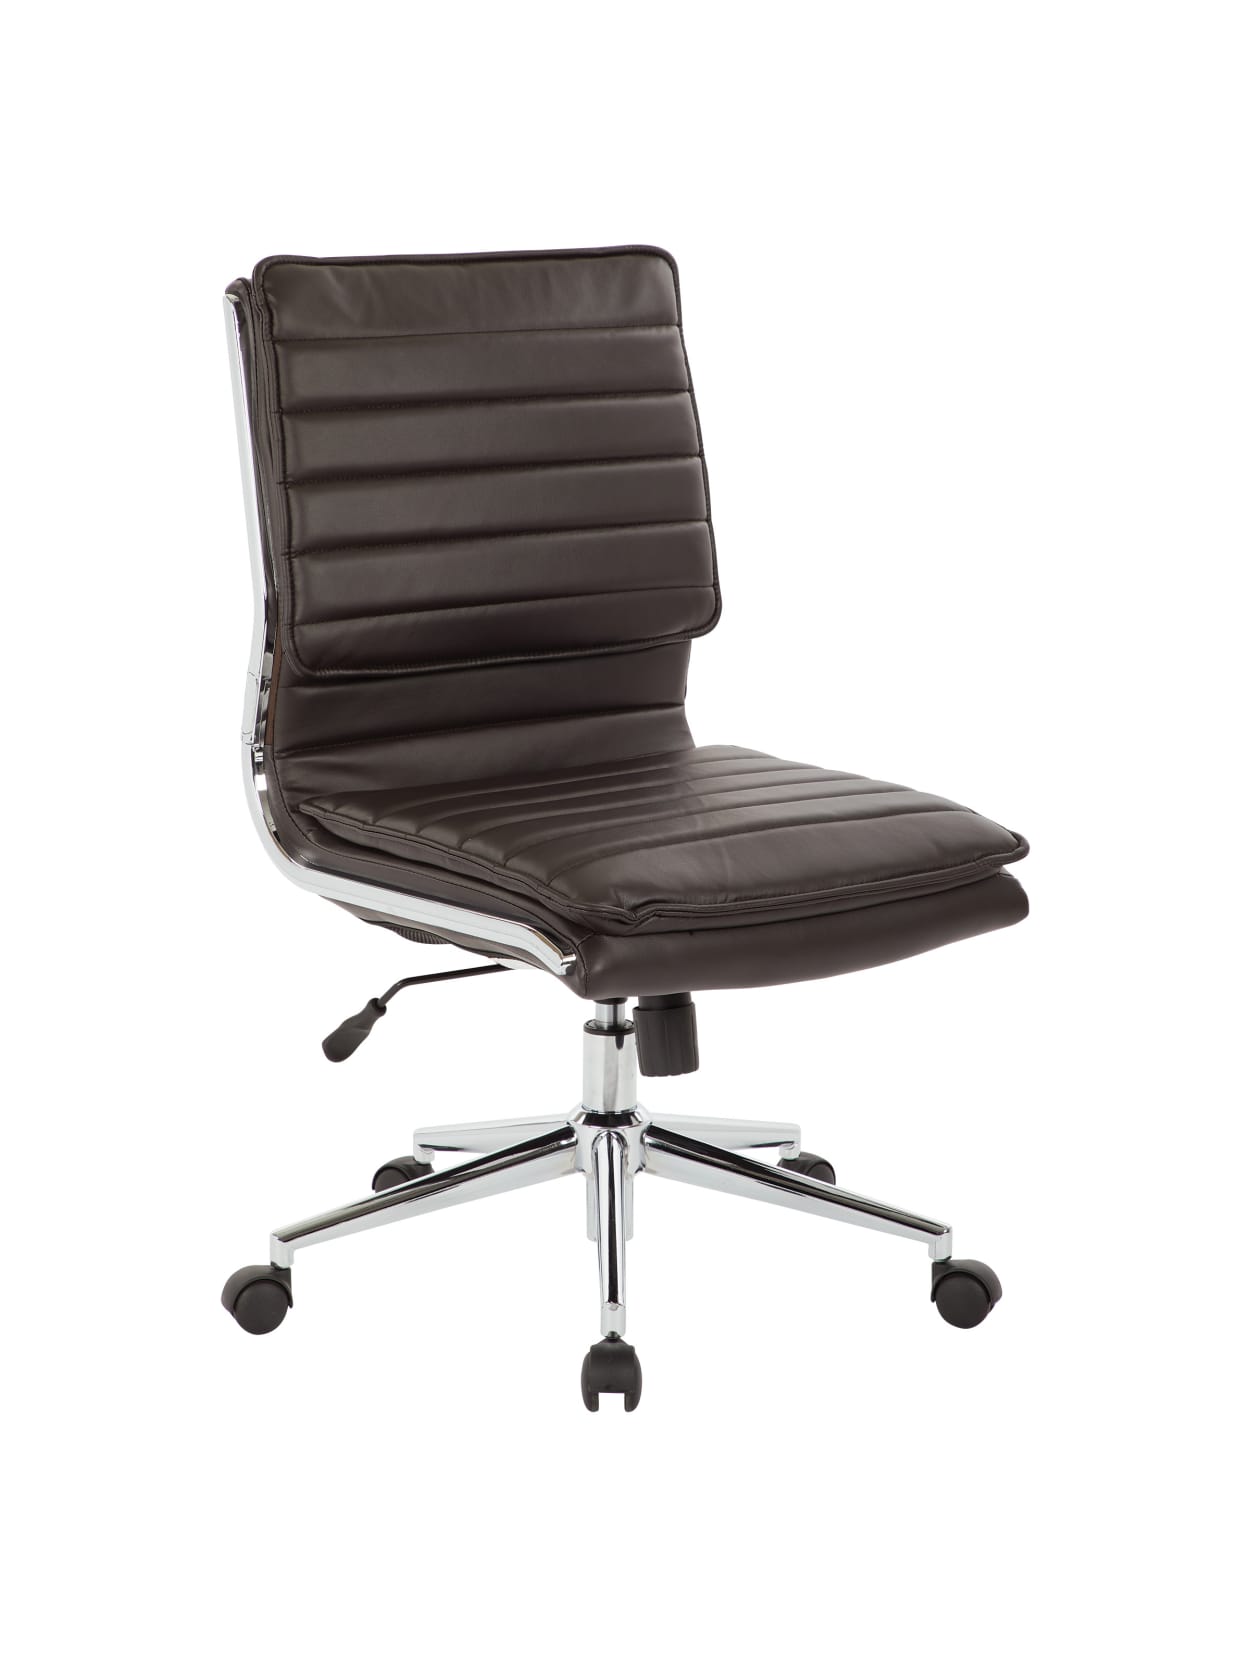 Office Star Pro Line Ii Spx Armless Bonded Leather Mid Back Chair Espressochrome Office Depot